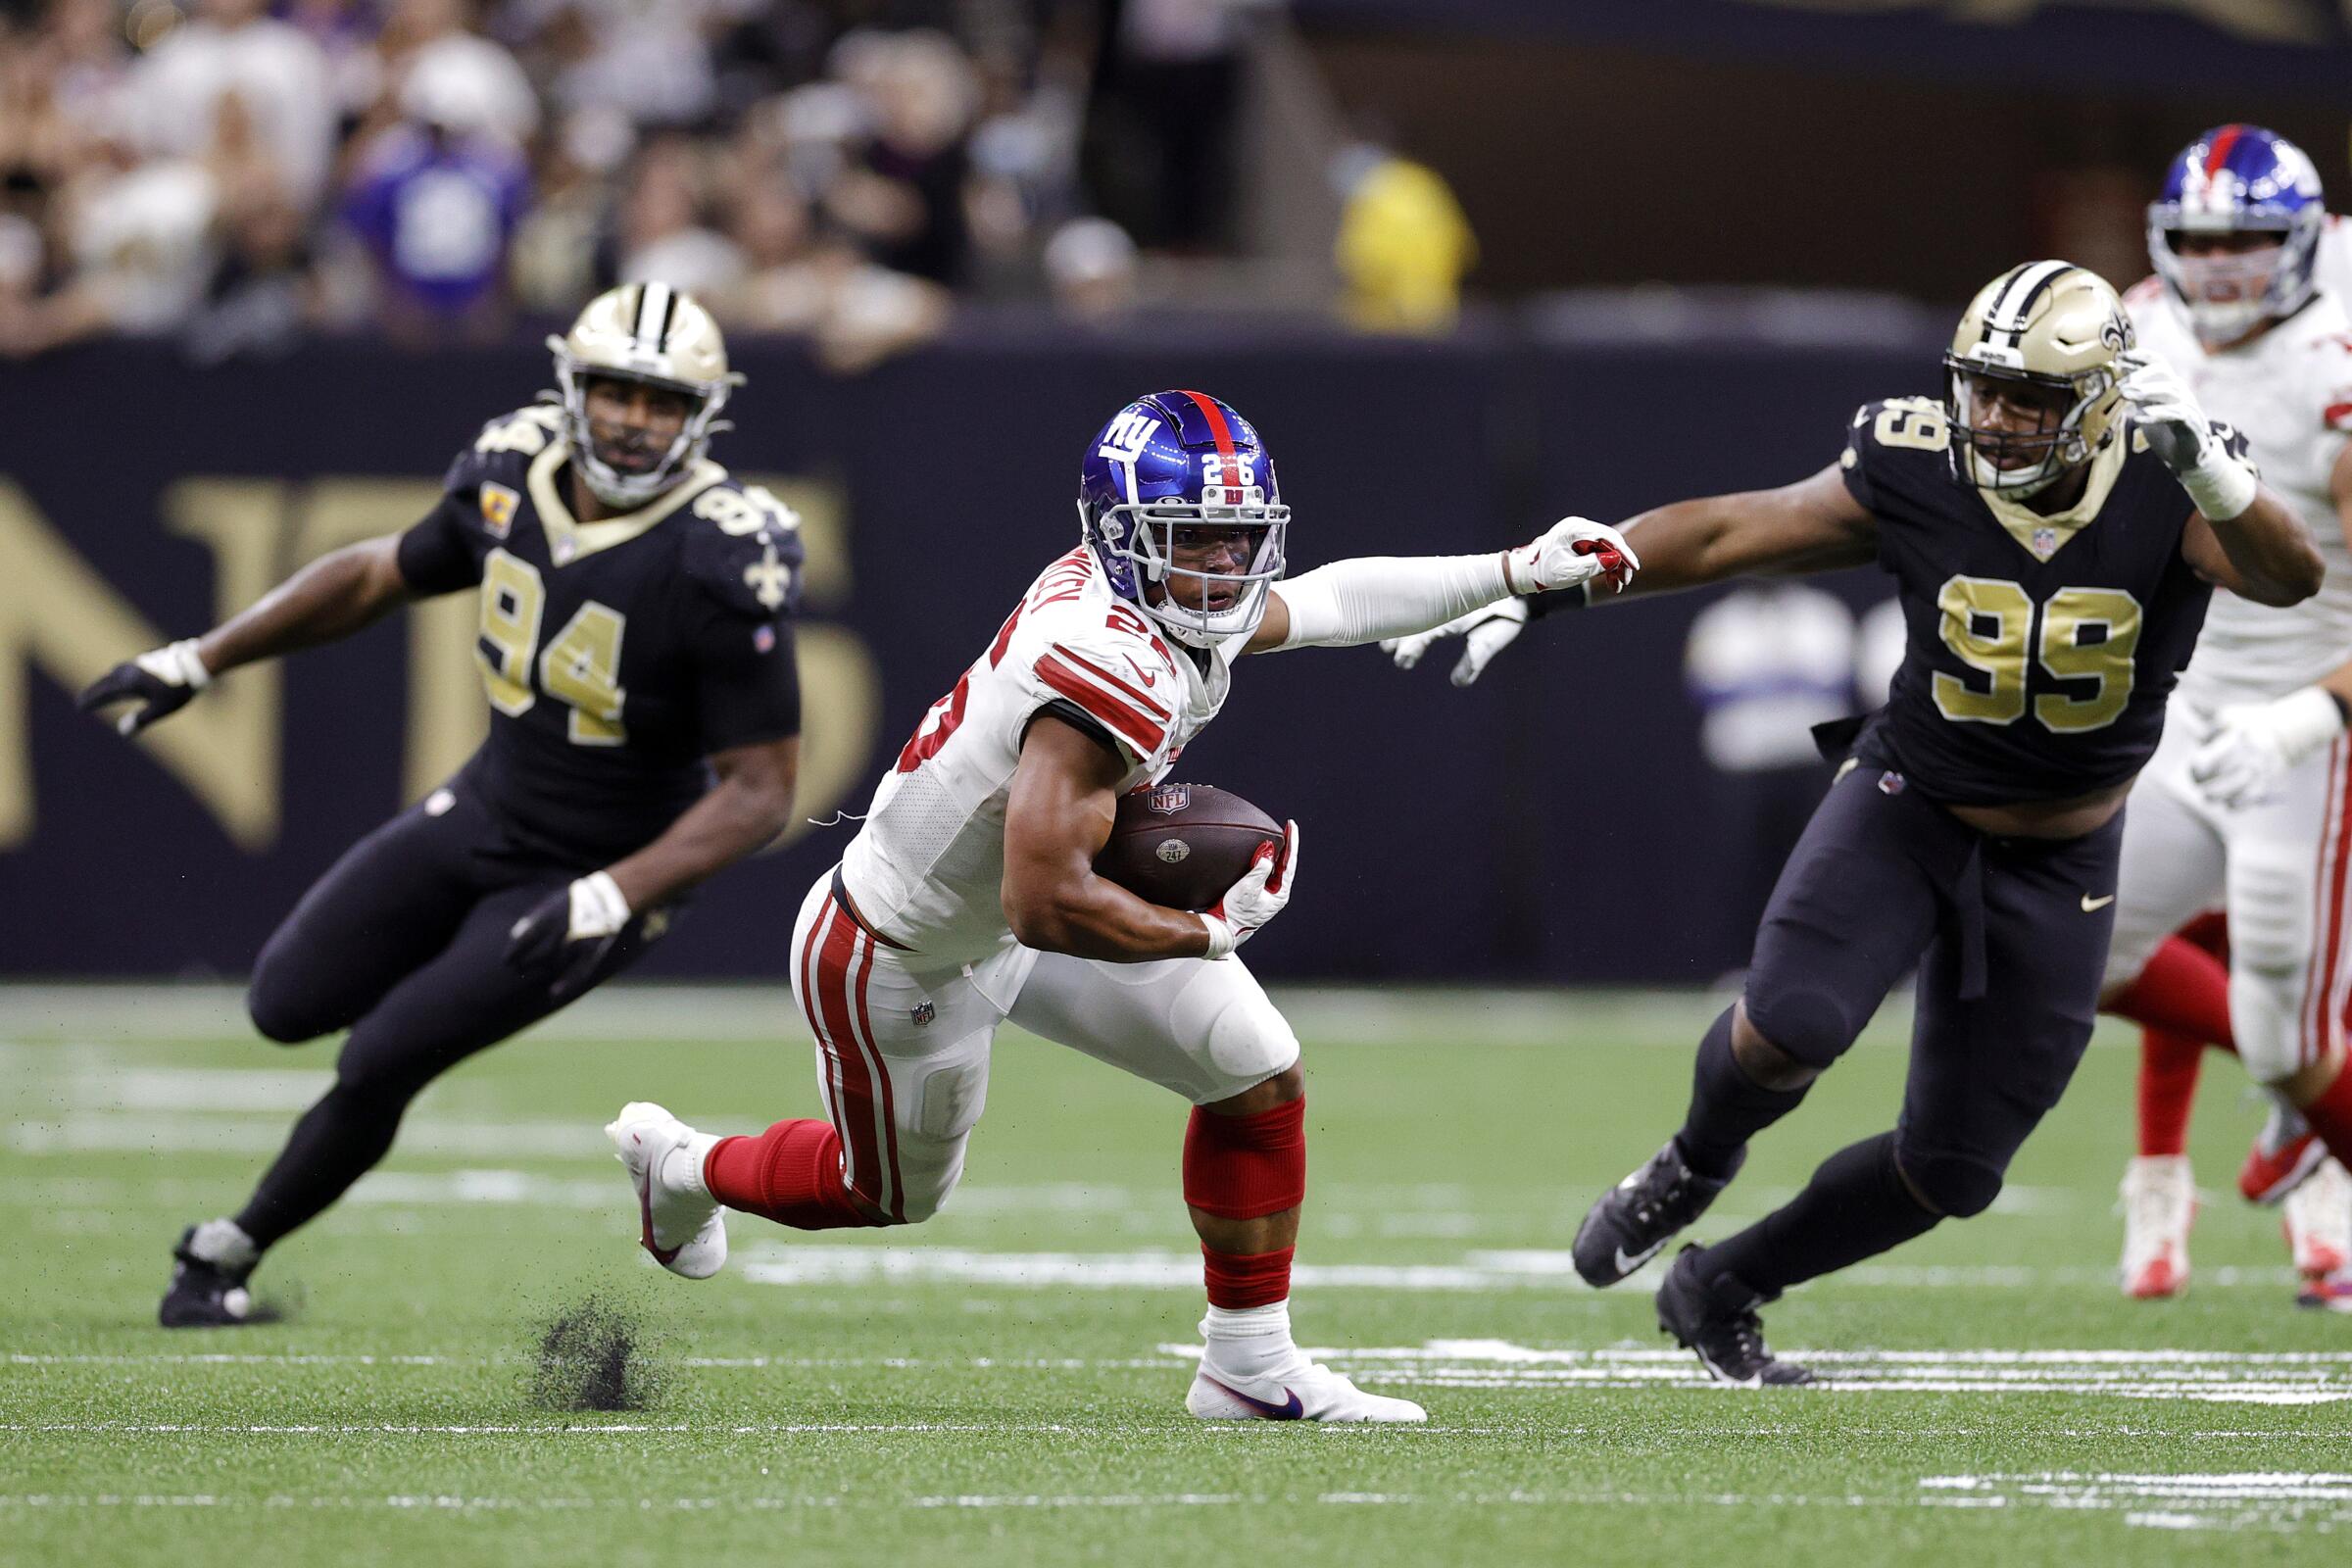 New York Giants running back Saquon Barkley carries the ball against the New Orleans Saints.